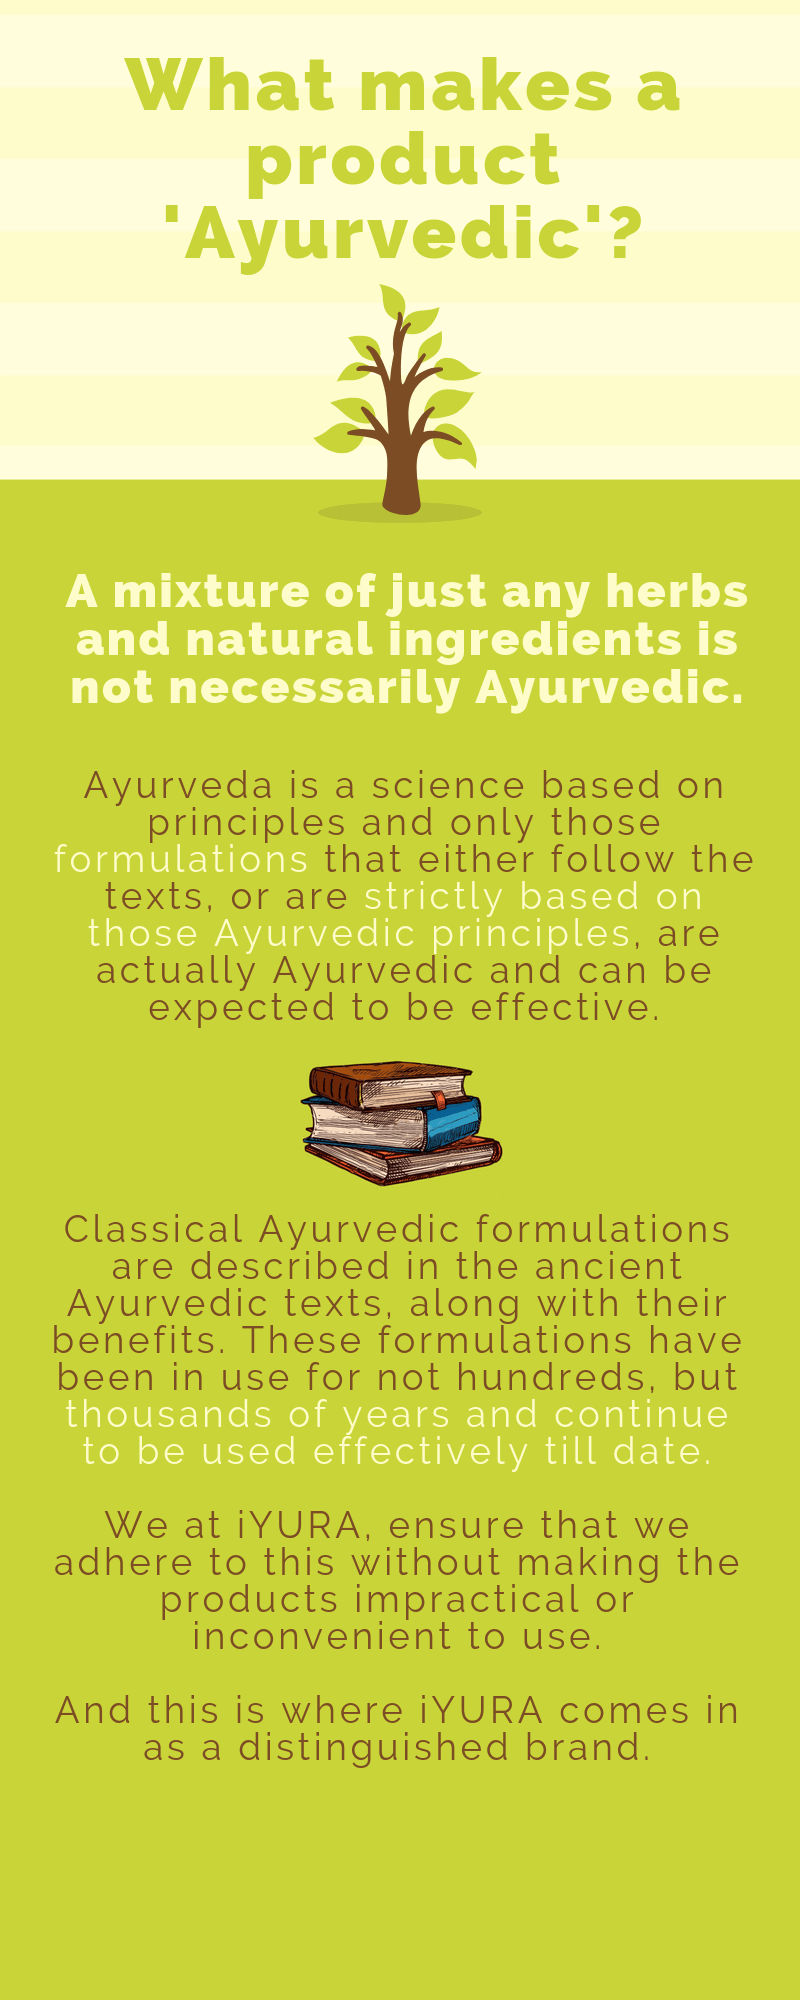 iYURA's ayurvedic and botanical research is the basis of all their actions. No cursory heresy, only time-tested formulations brought to life pragmatically. 